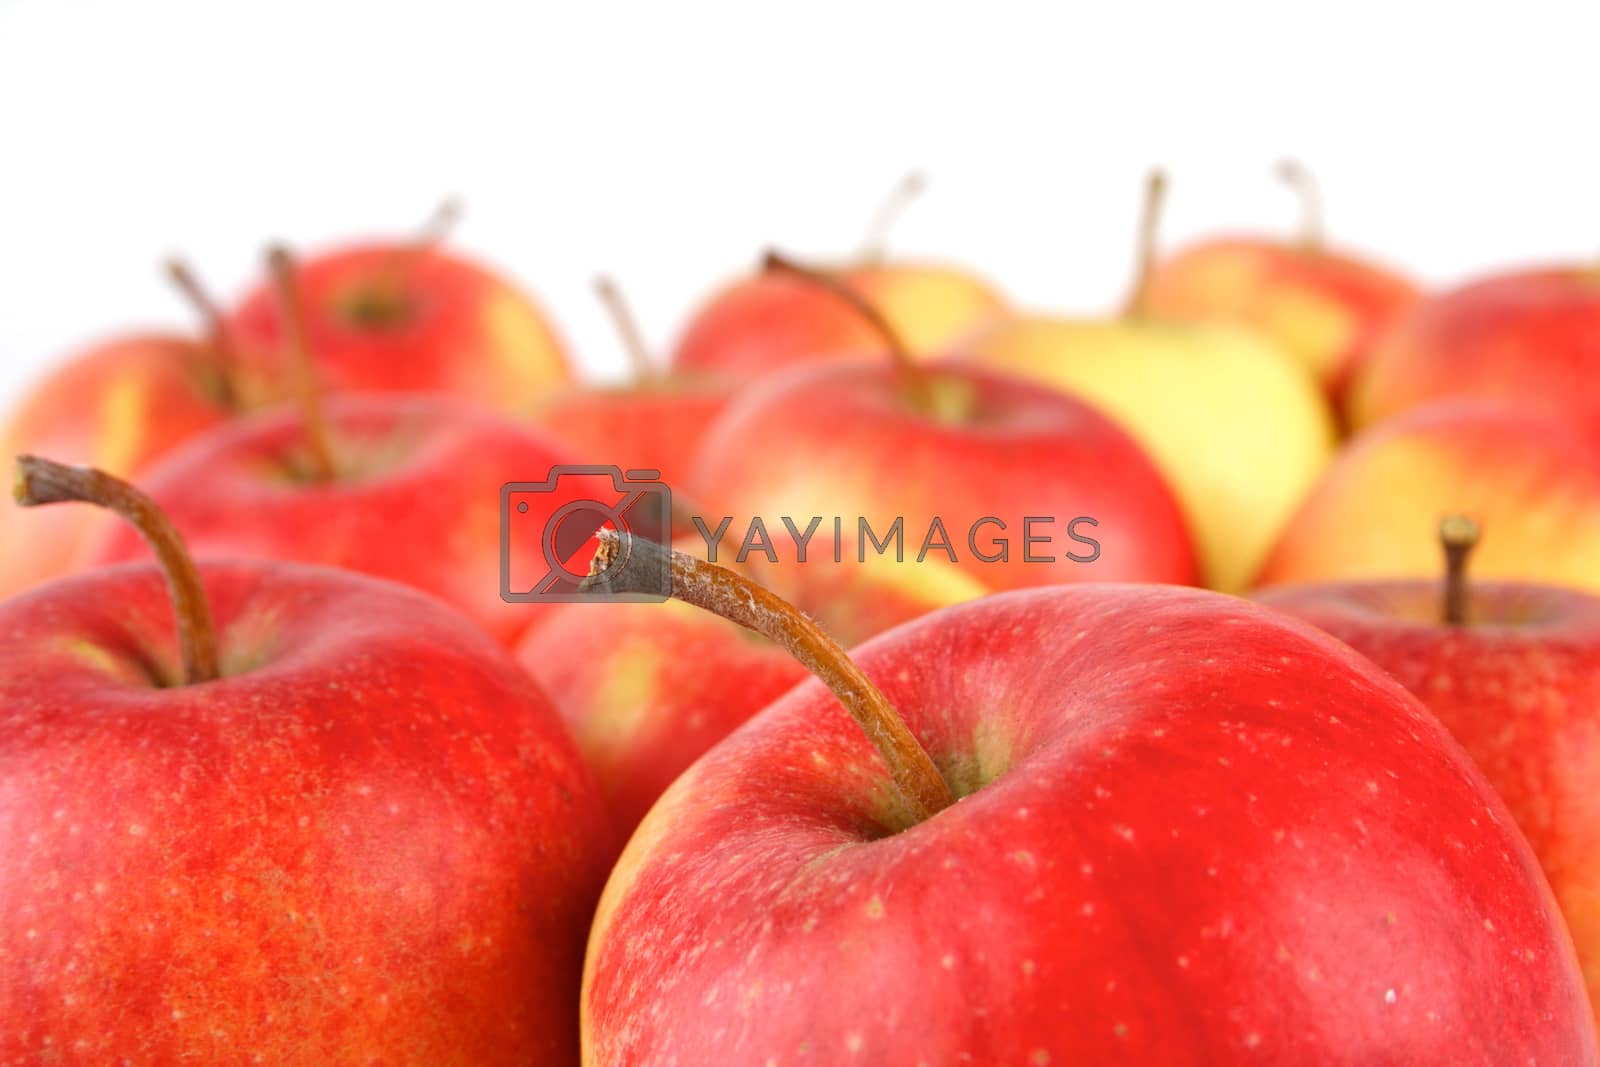 Royalty free image of Apples by moodboard